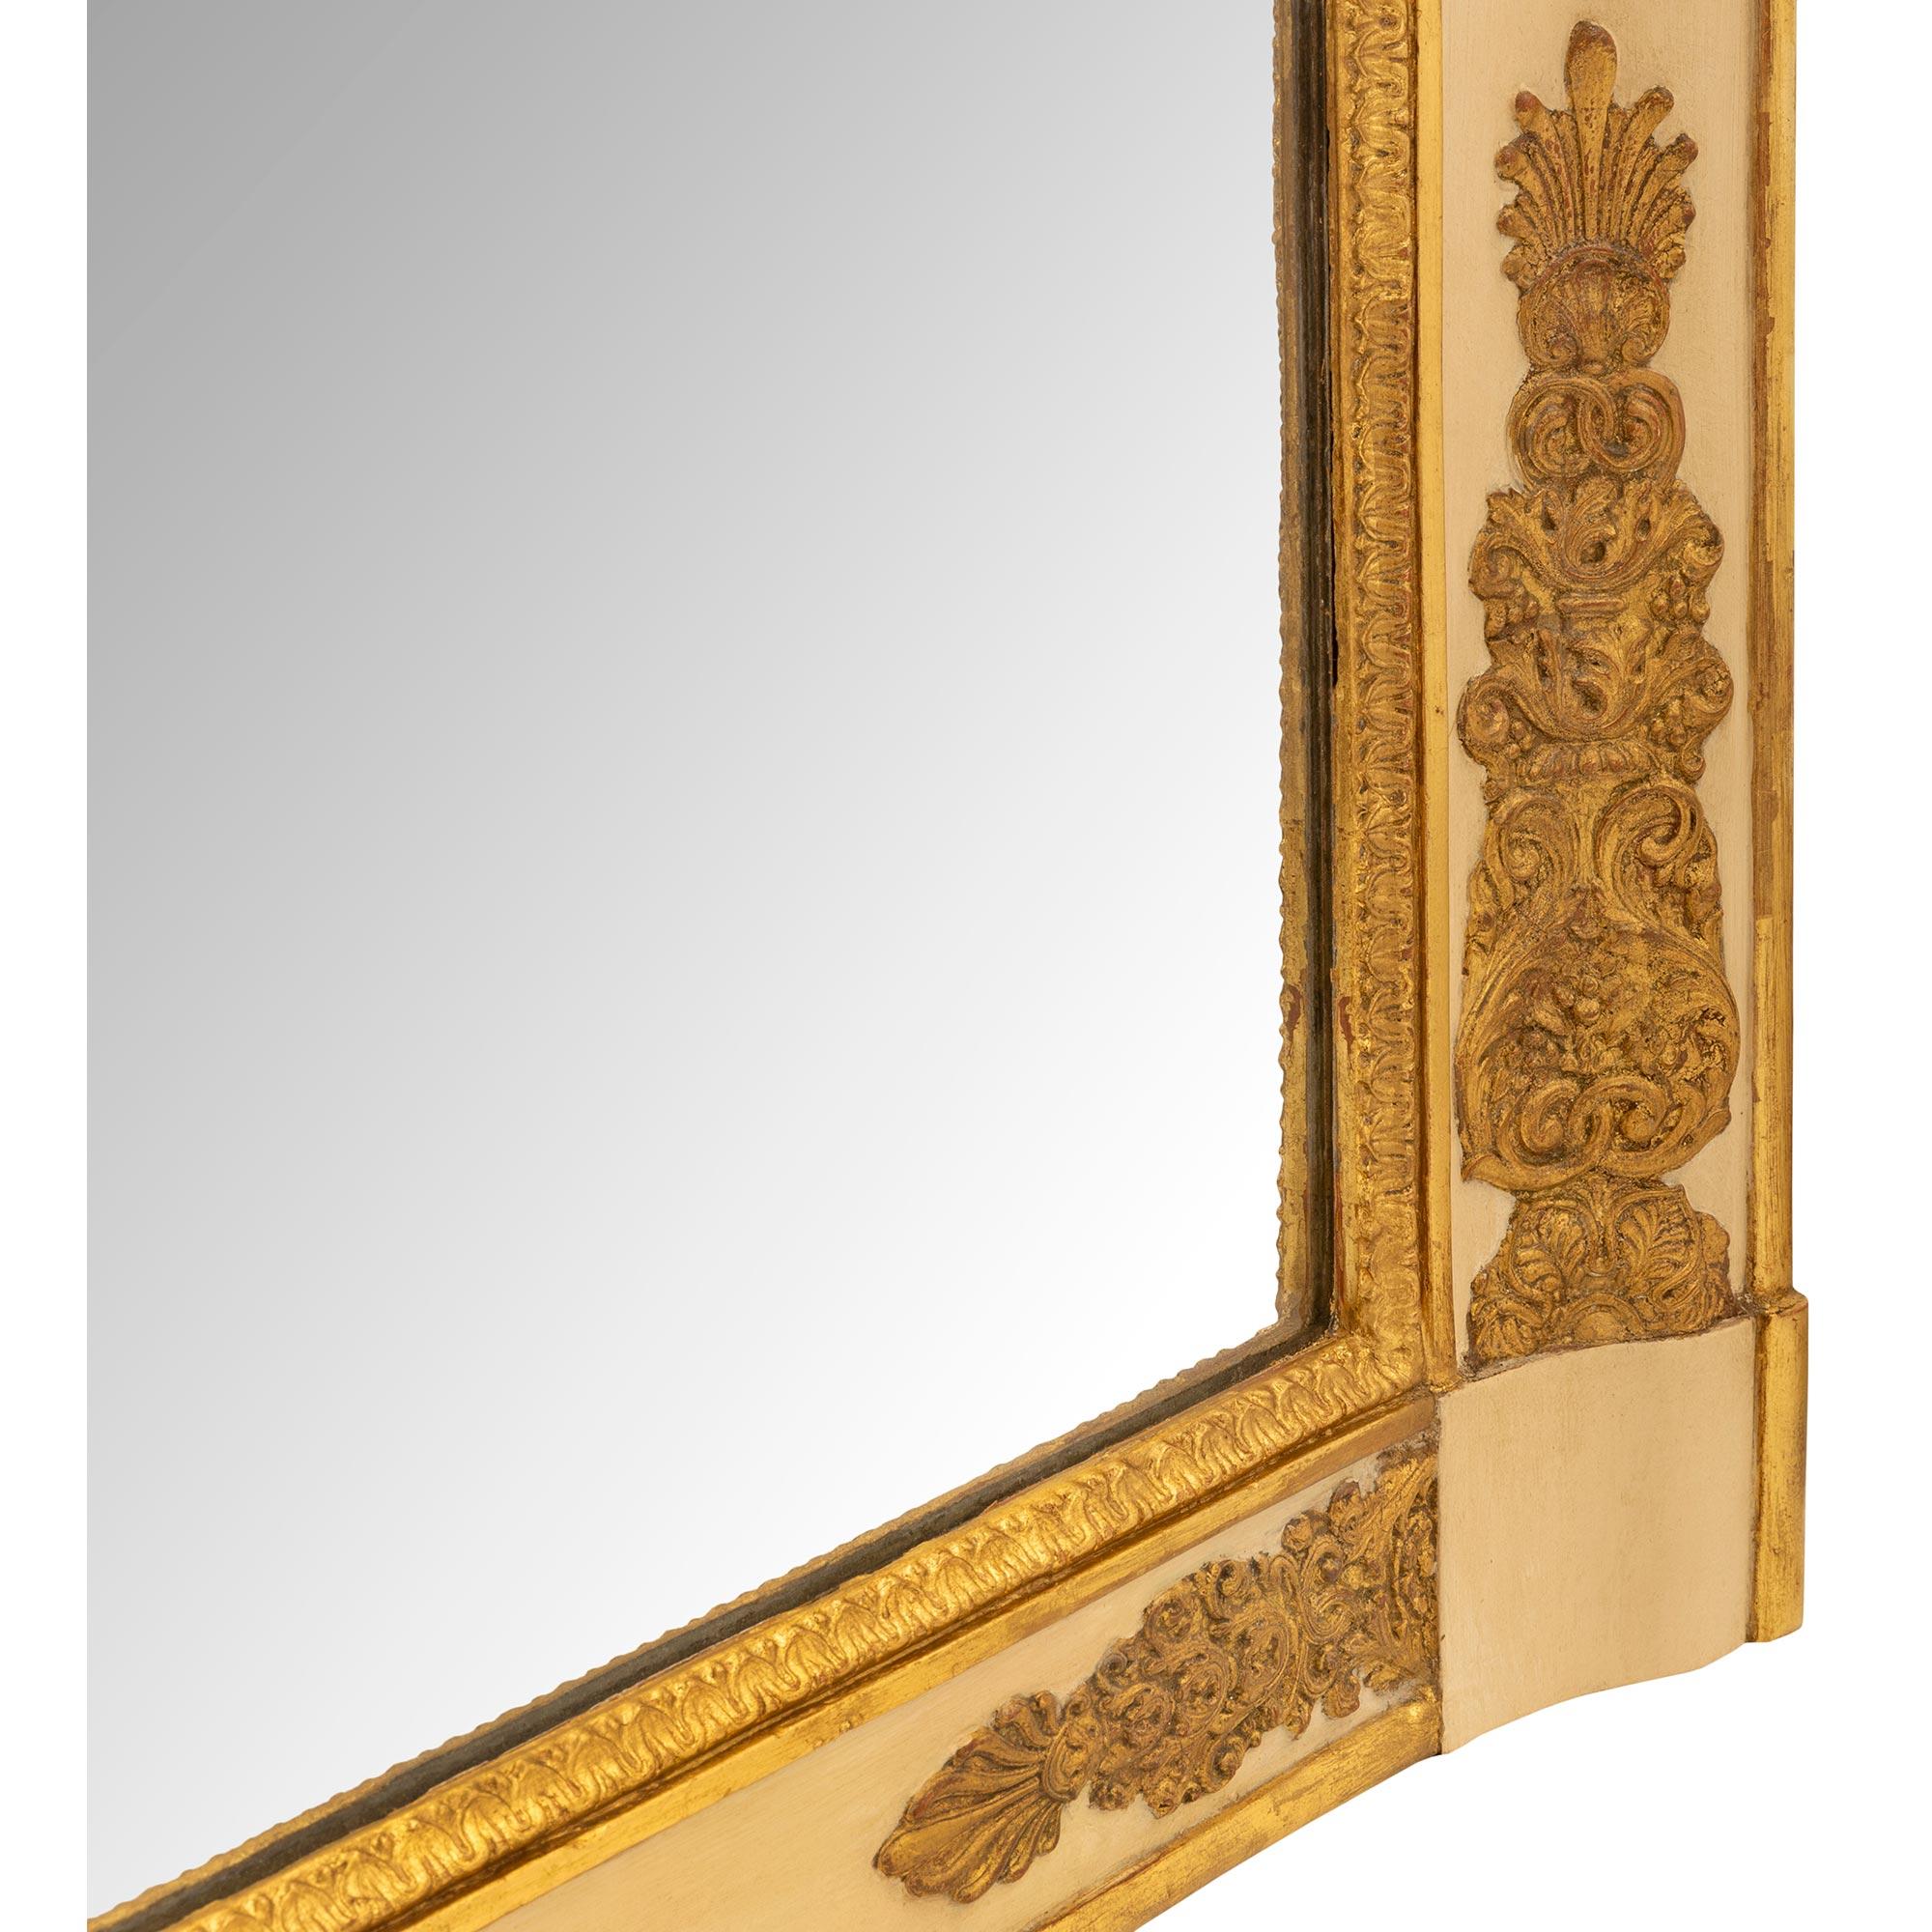 A pair of French early 19th century Empire period giltwood mirrors For Sale 2